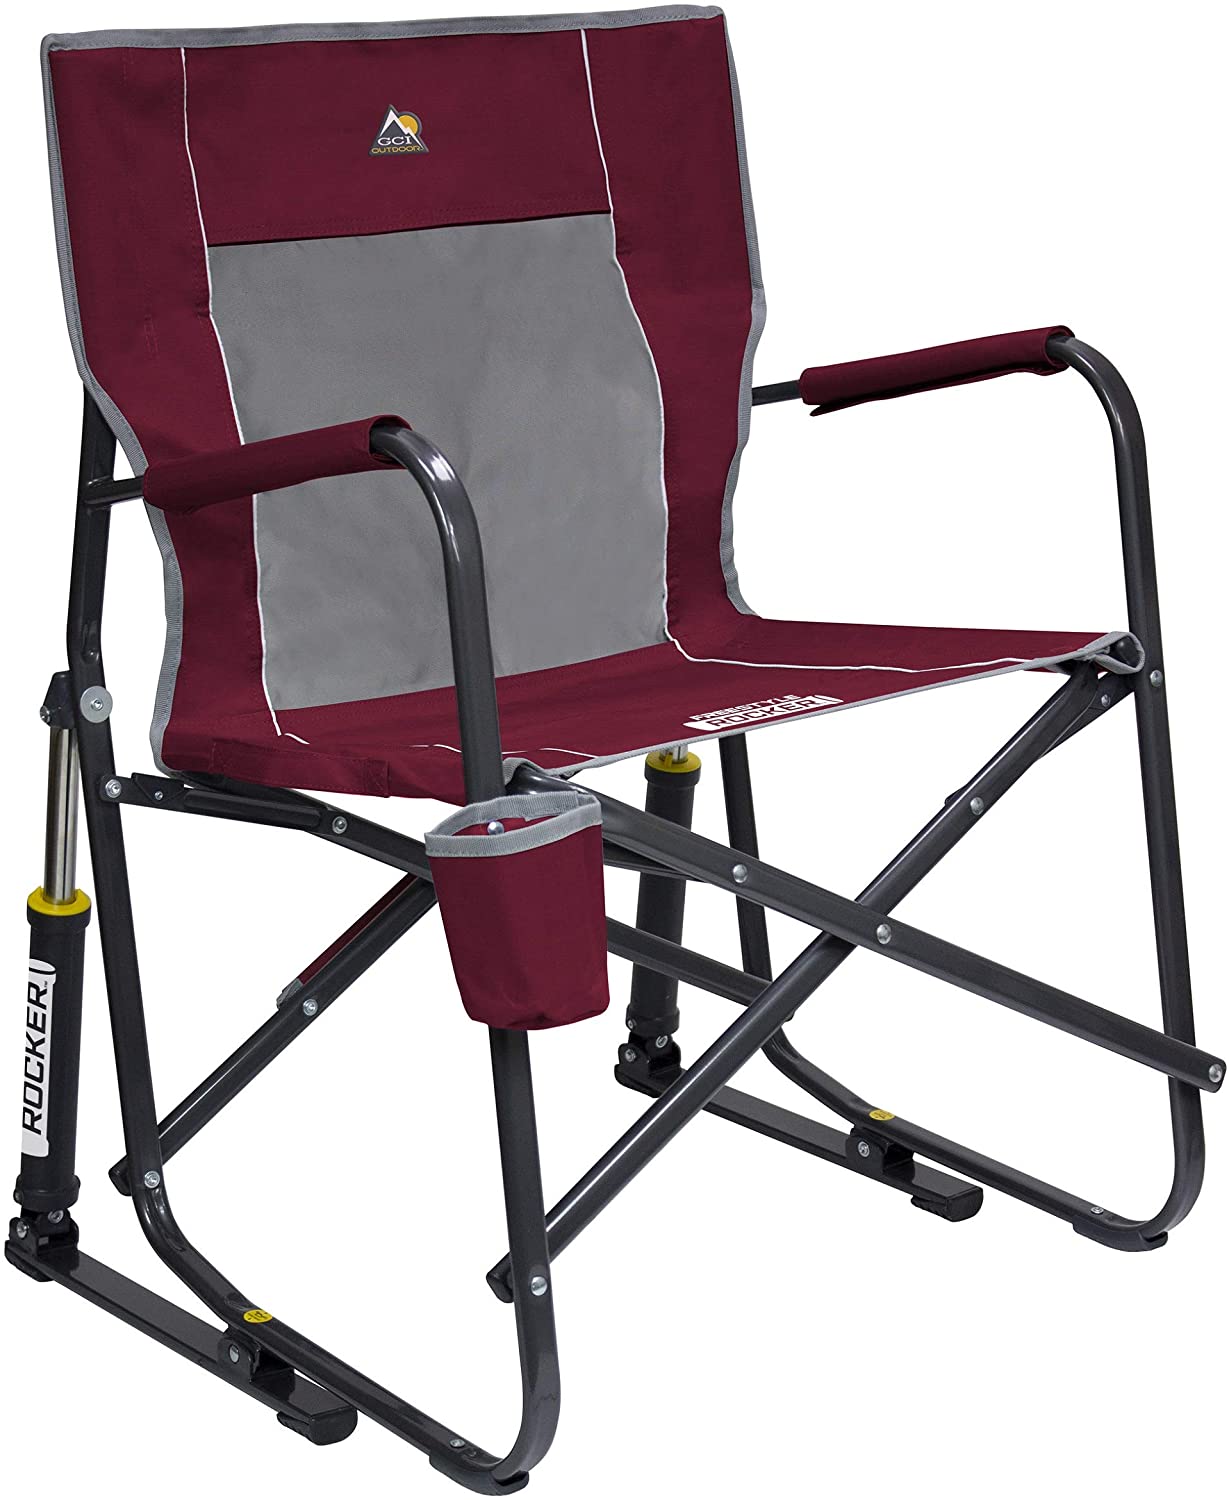 GCI Outdoor Freestyle Rocker Portable Folding Rocking Chair - image 1 of 4